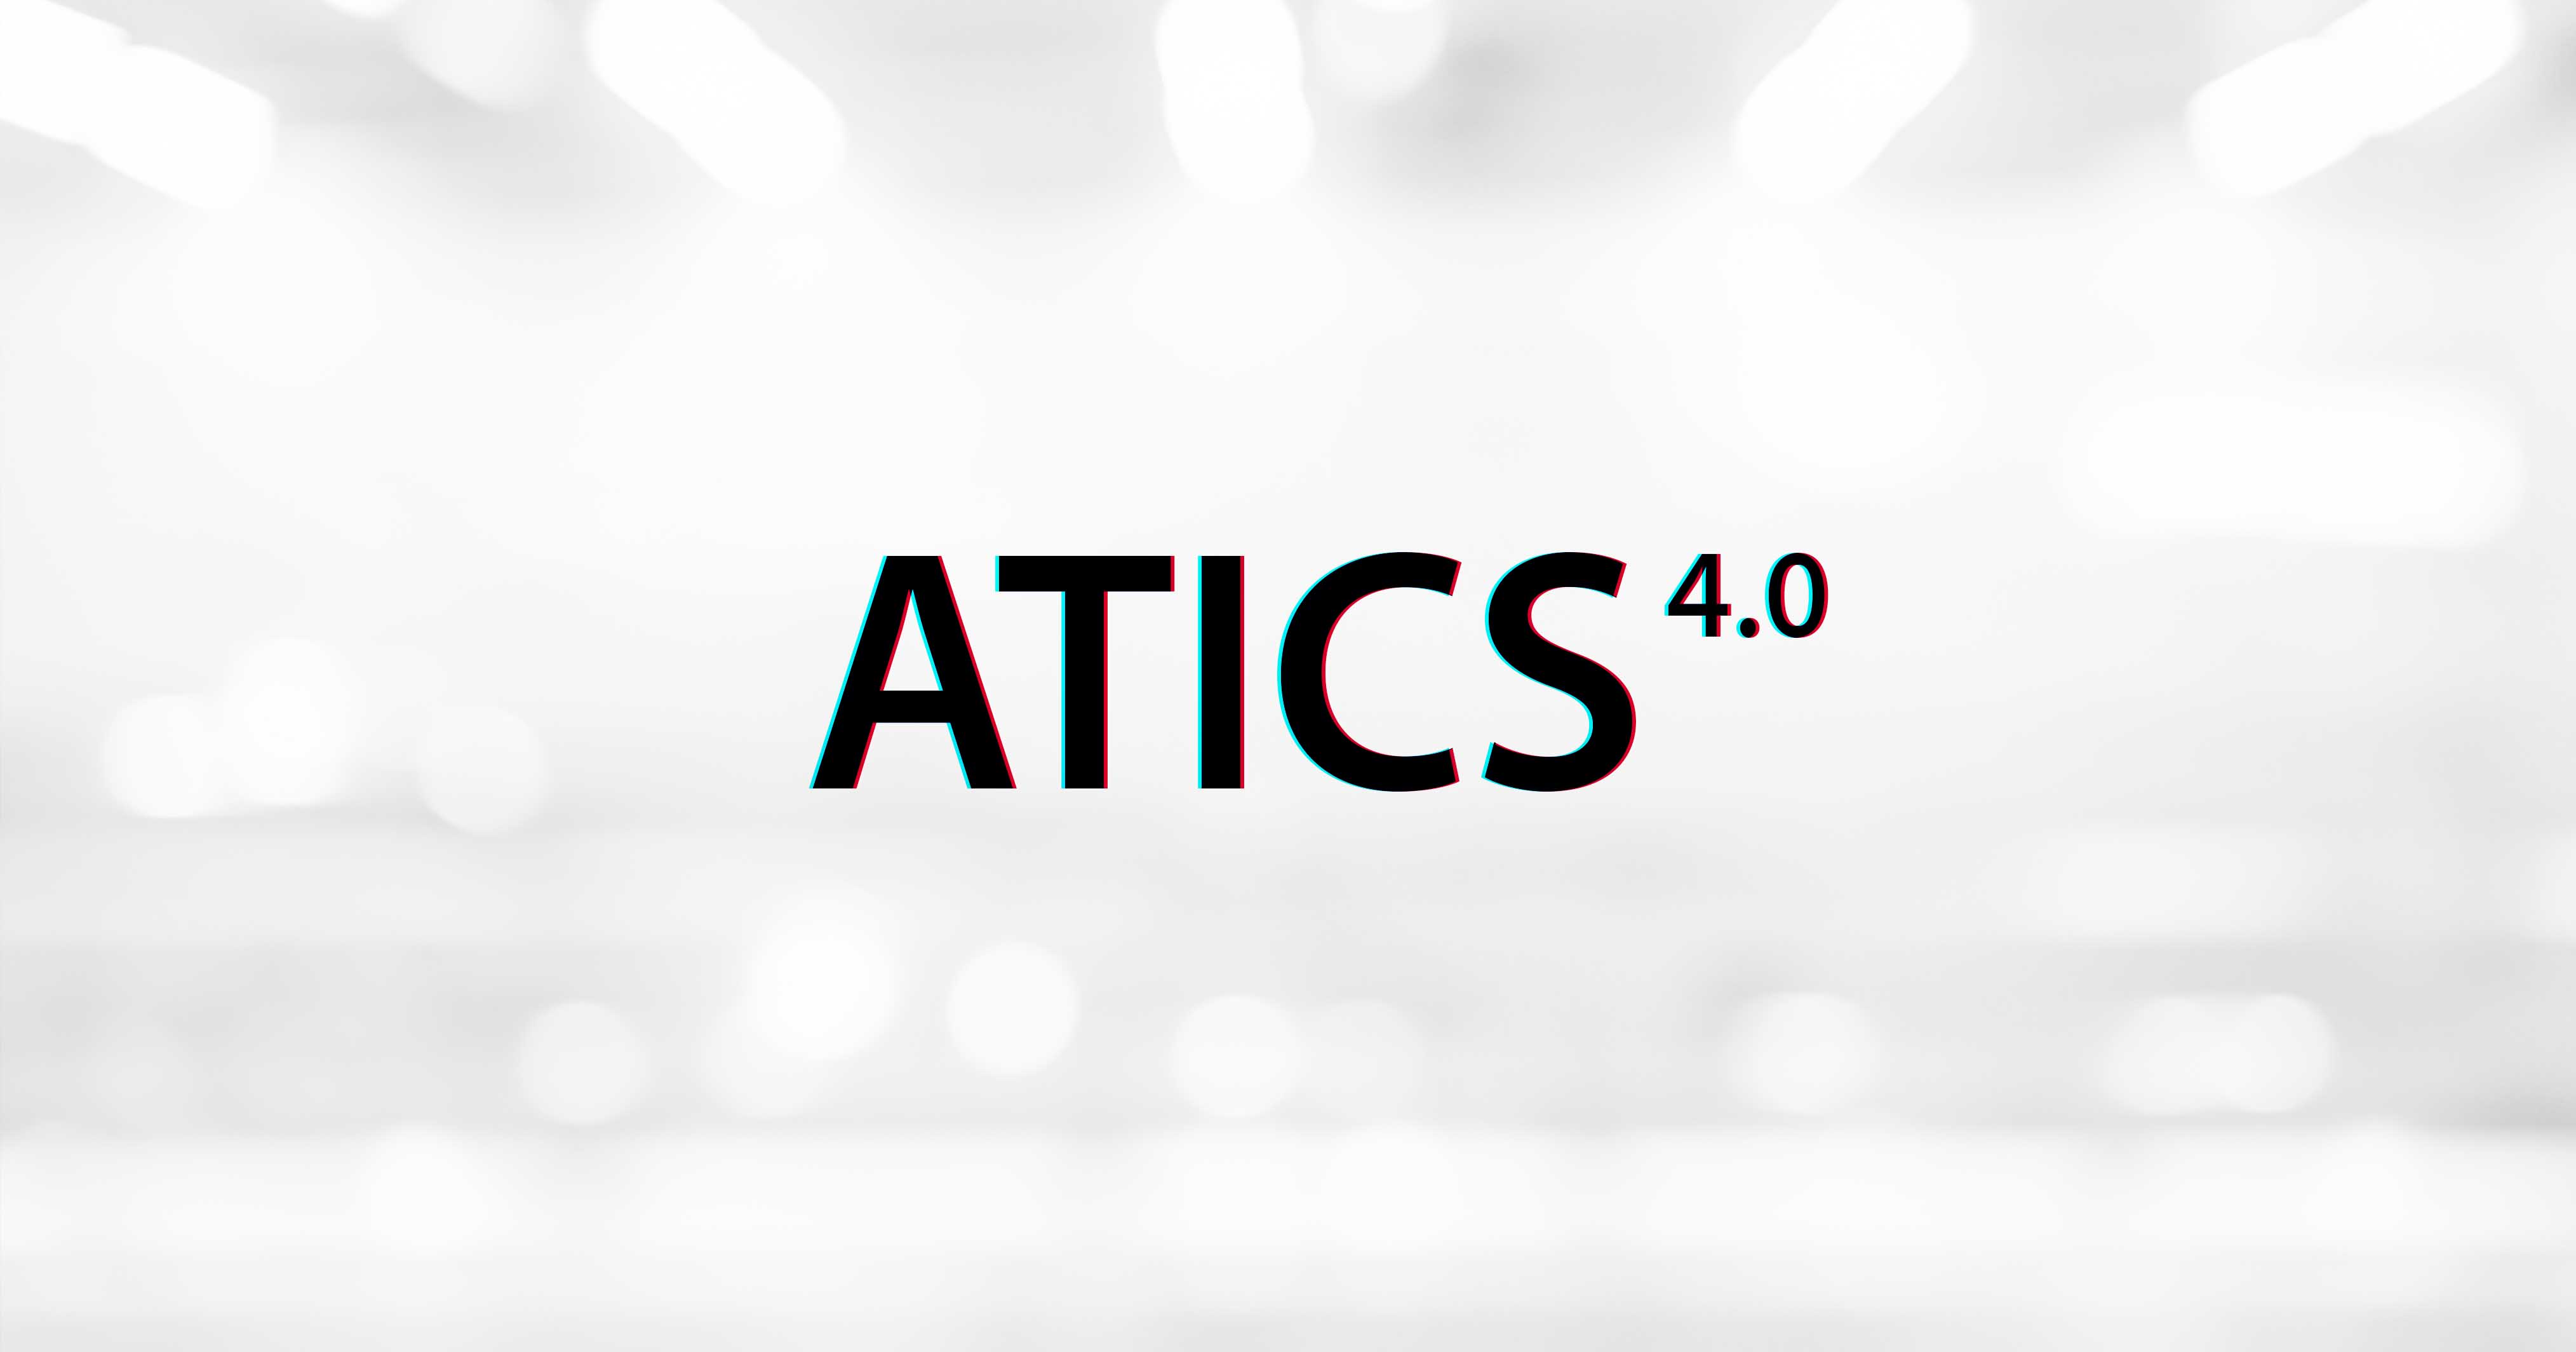 An image of the words ATICS 4.0 on a white background.